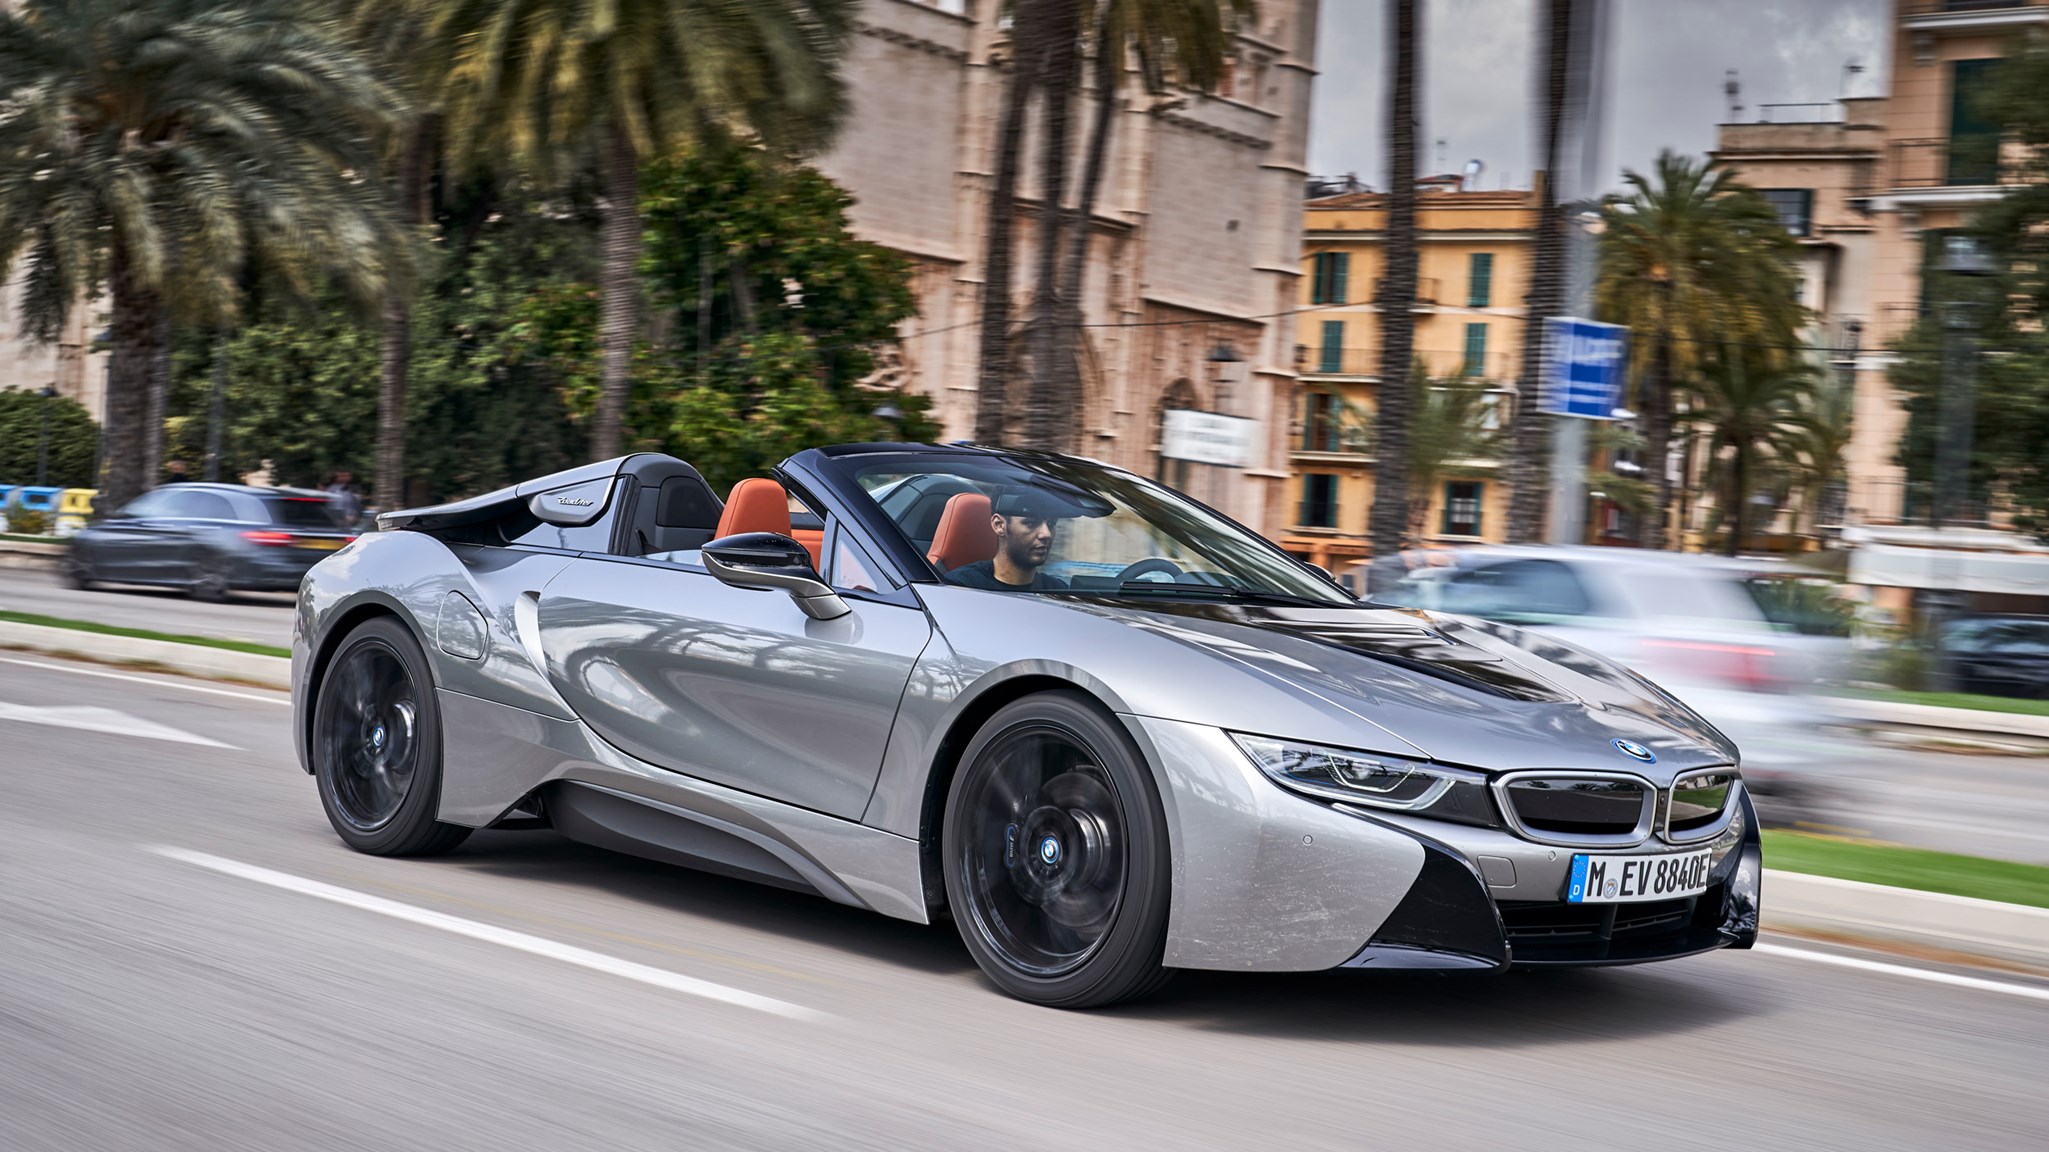 BMW i8 Roadster review: the hybrid supercar, refined | CAR ...